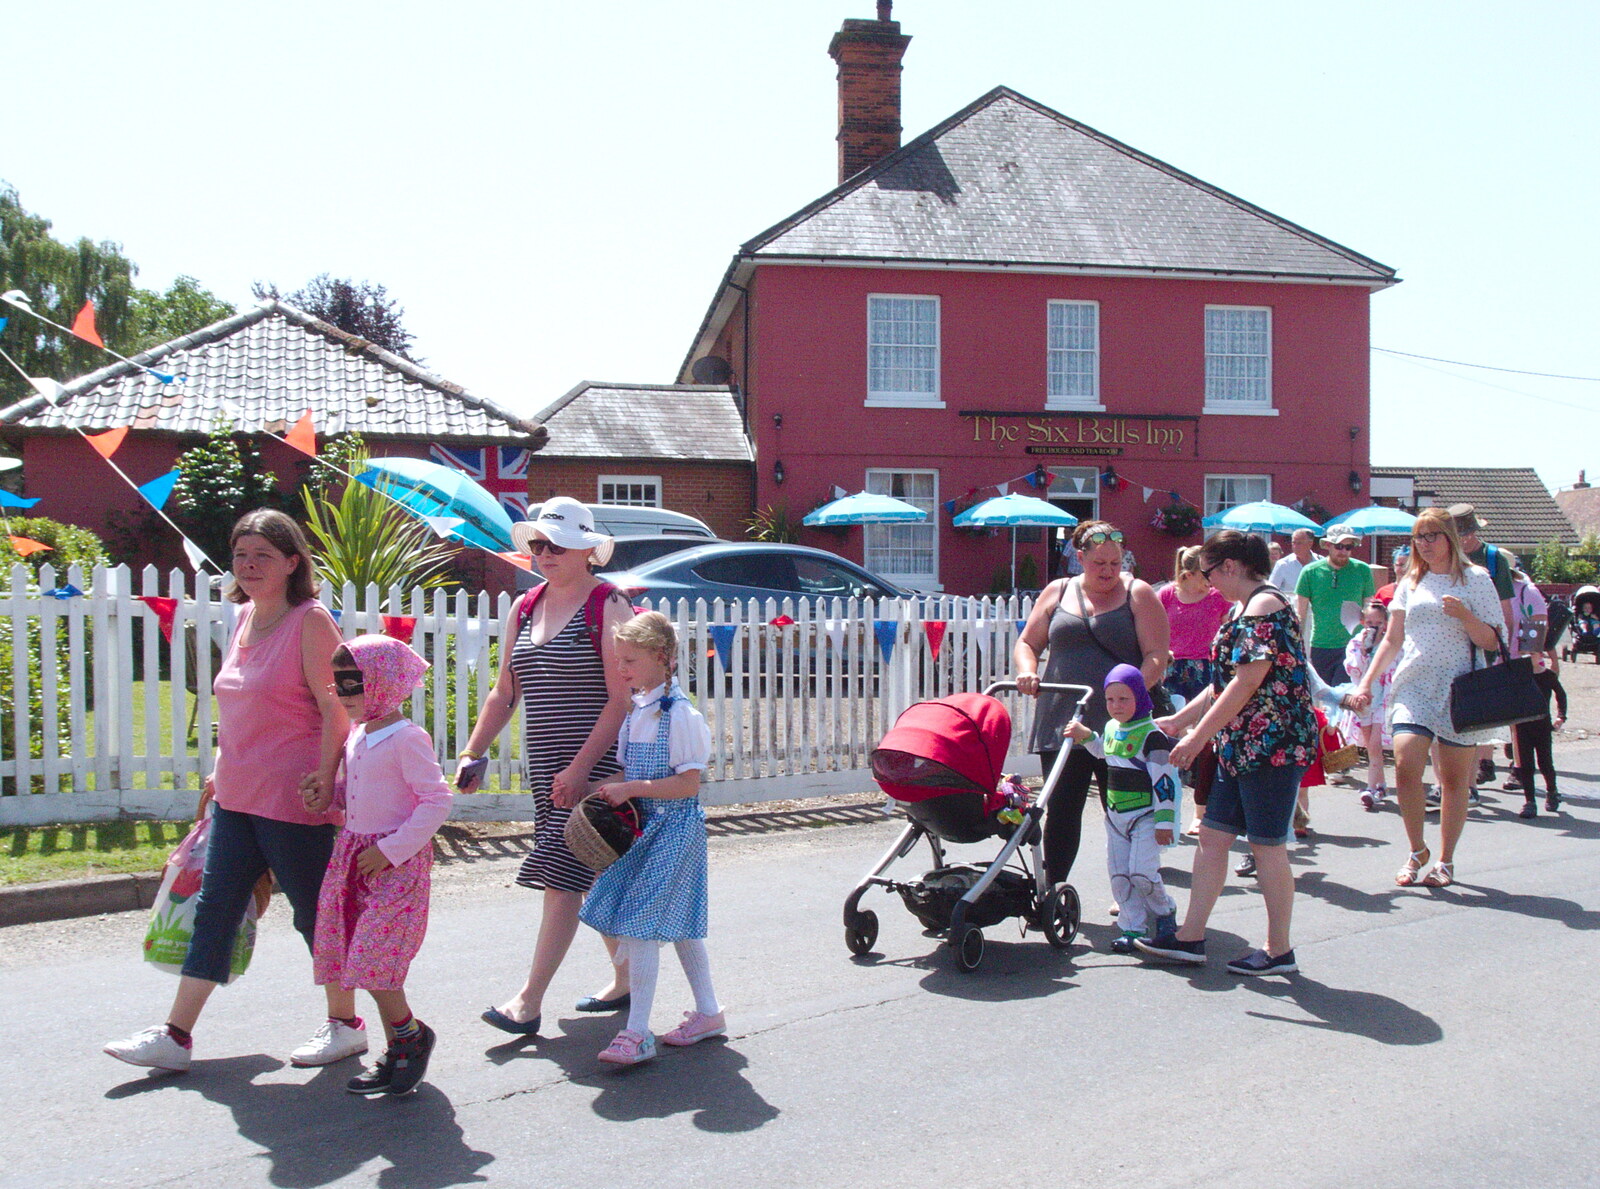 A small crowd follows along from GSB and the Gislingham Fete, Suffolk - 29th June 2019